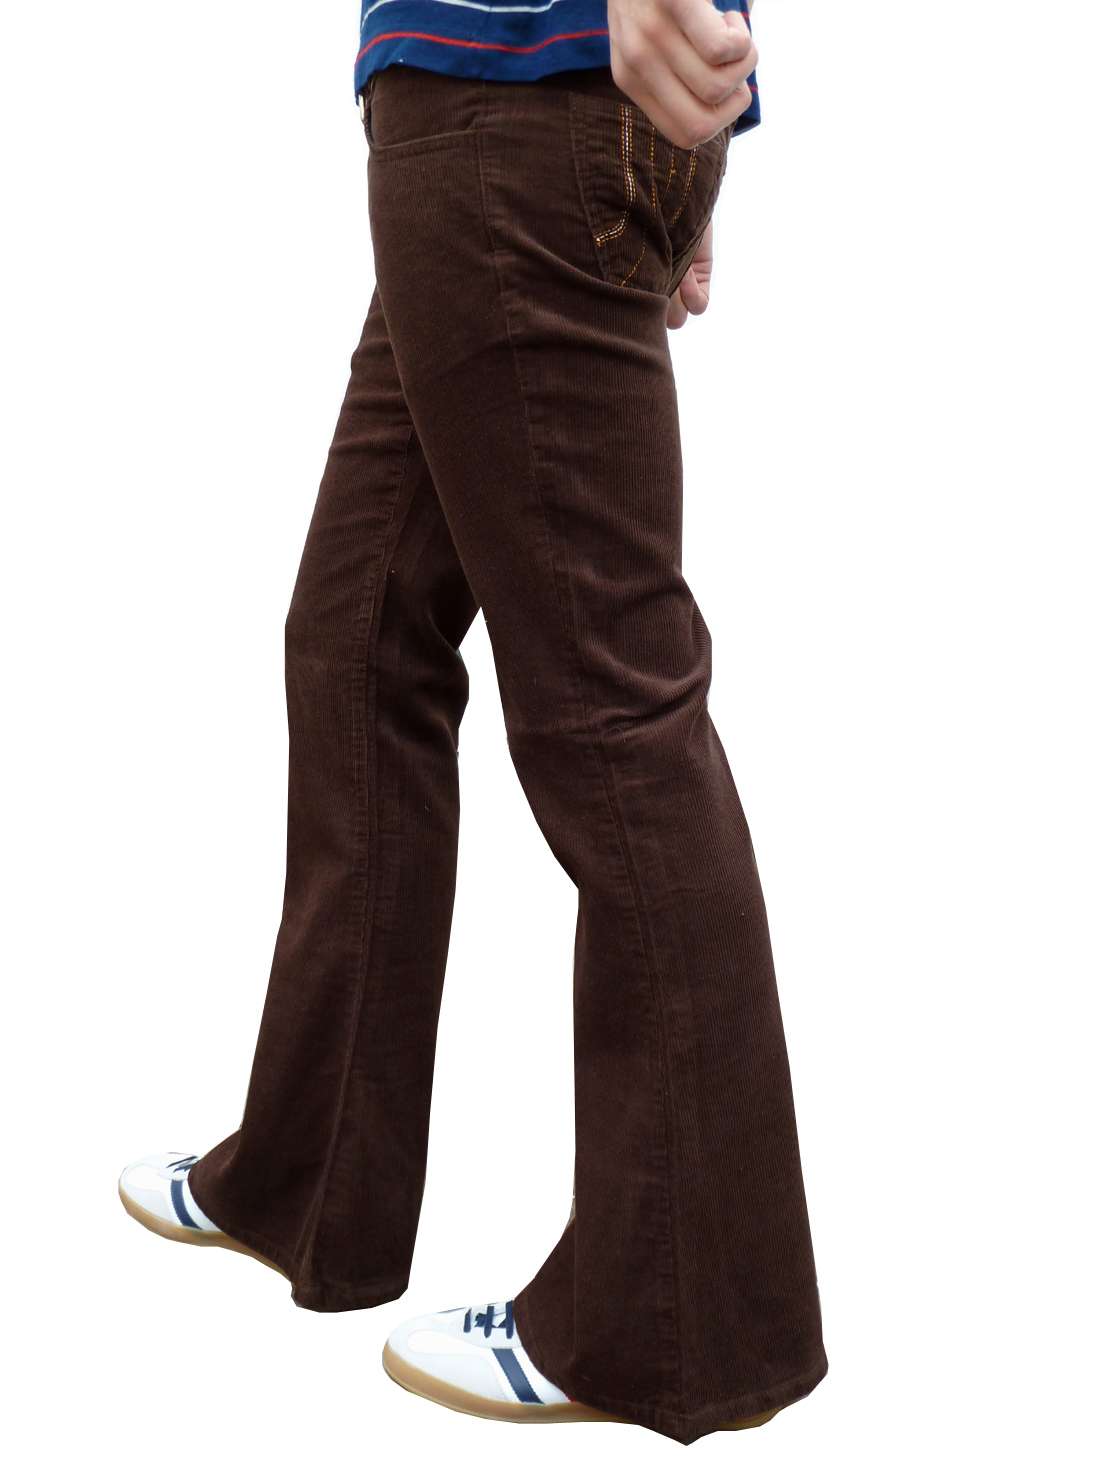 Mens Flares Brown Corduroy Flared Bell Bottoms Pants Hippie indie 70s ...